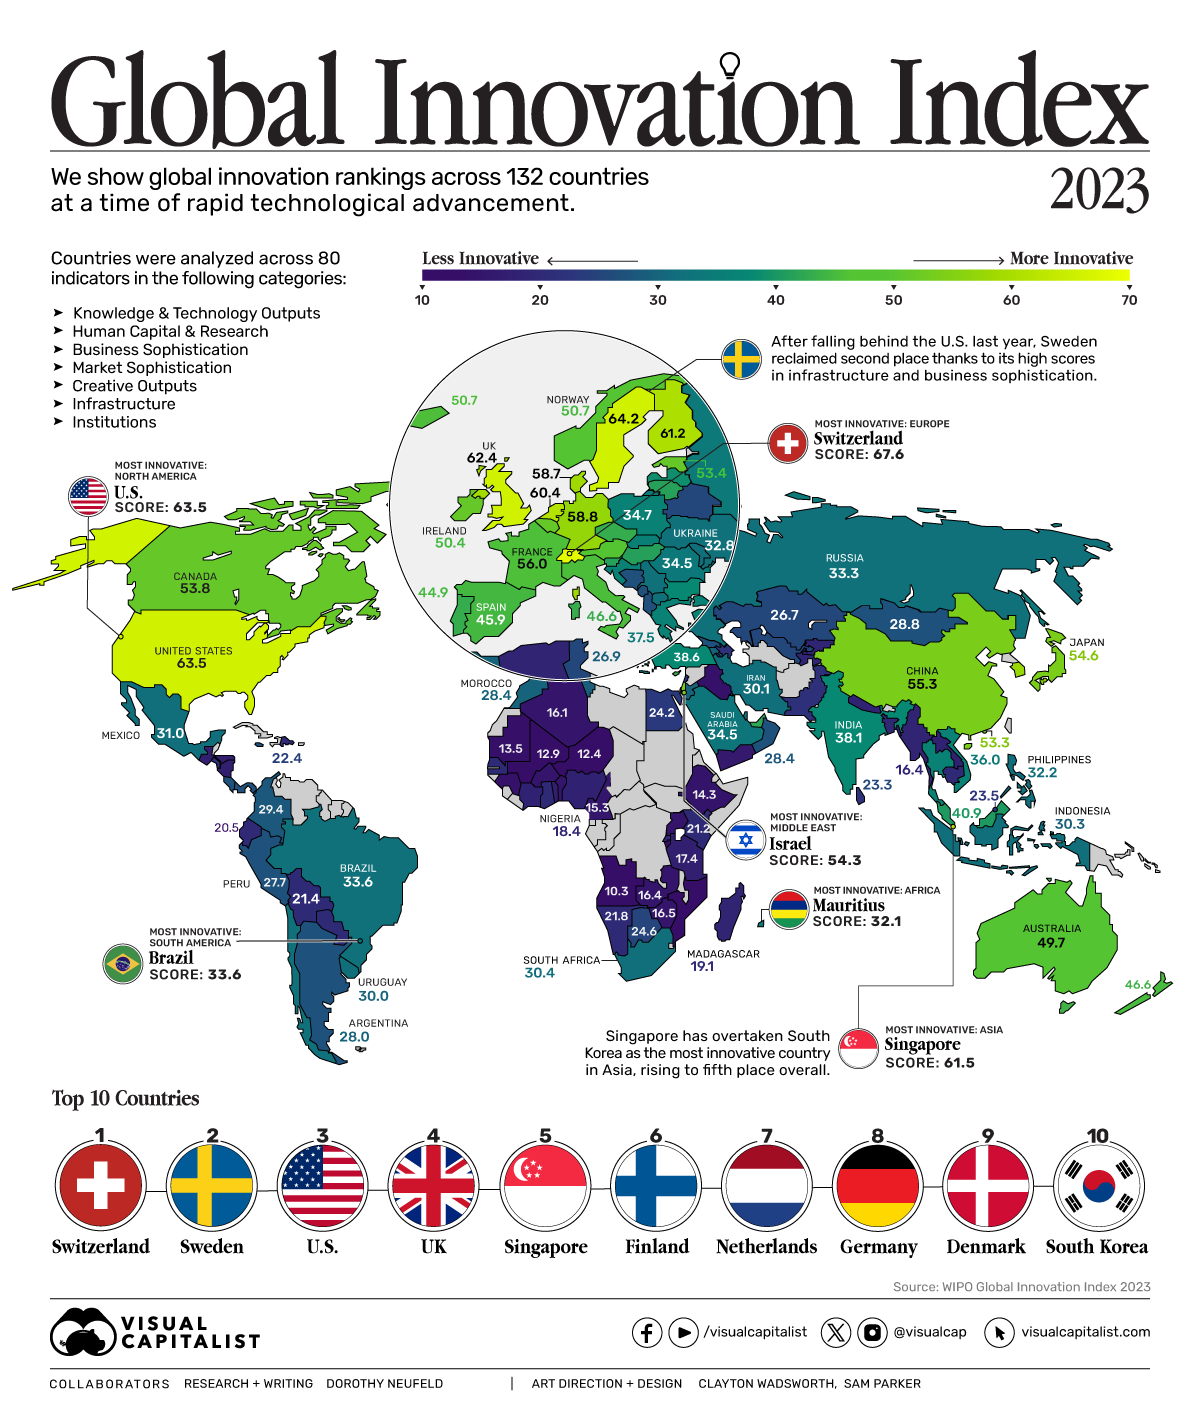 Mapped: The Most Innovative Countries in 2023